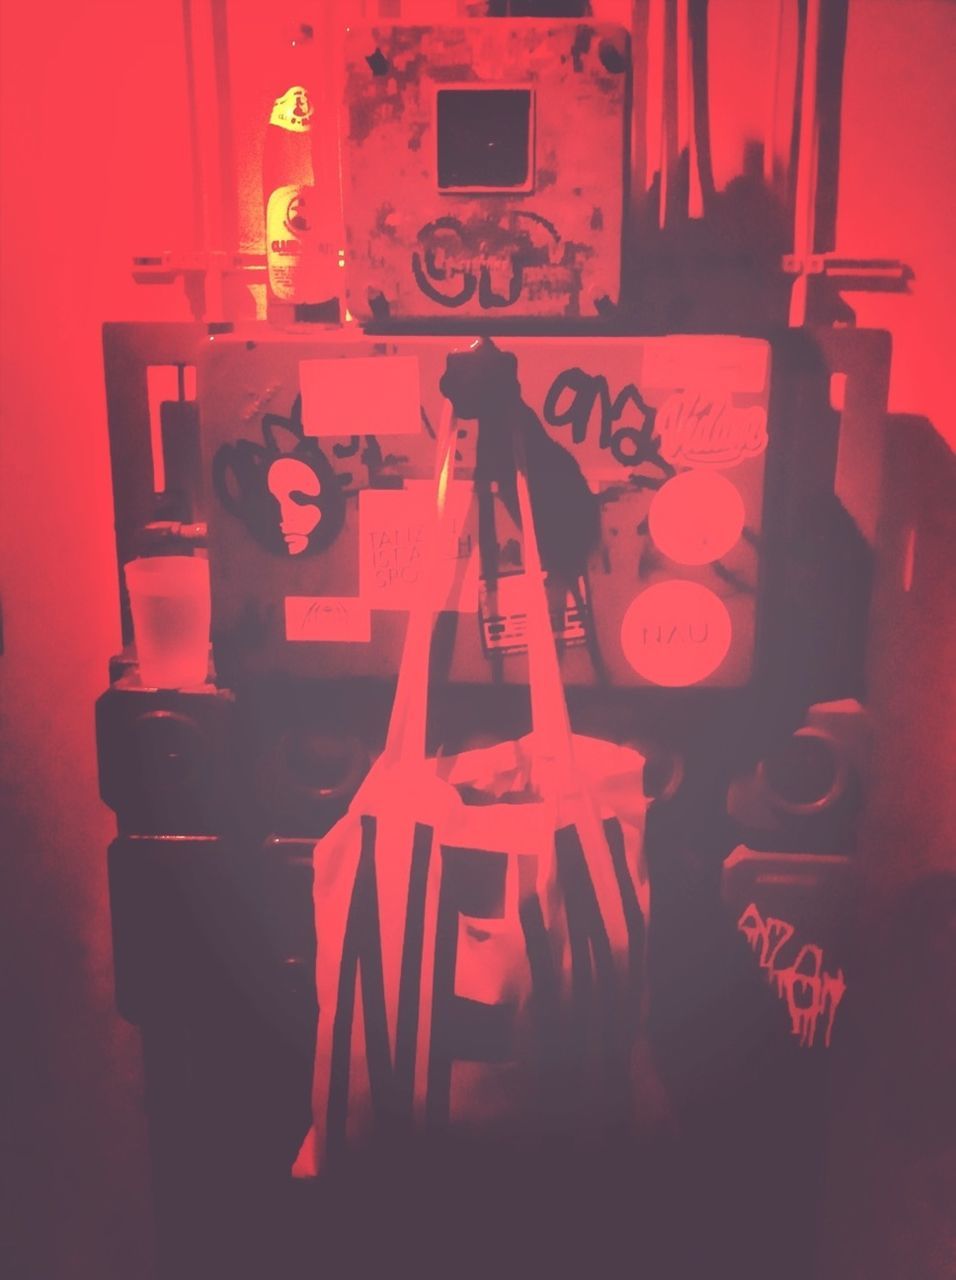 indoors, red, table, still life, close-up, home interior, chair, drink, restaurant, illuminated, candle, arts culture and entertainment, no people, technology, communication, food and drink, music, bottle, wood - material, absence